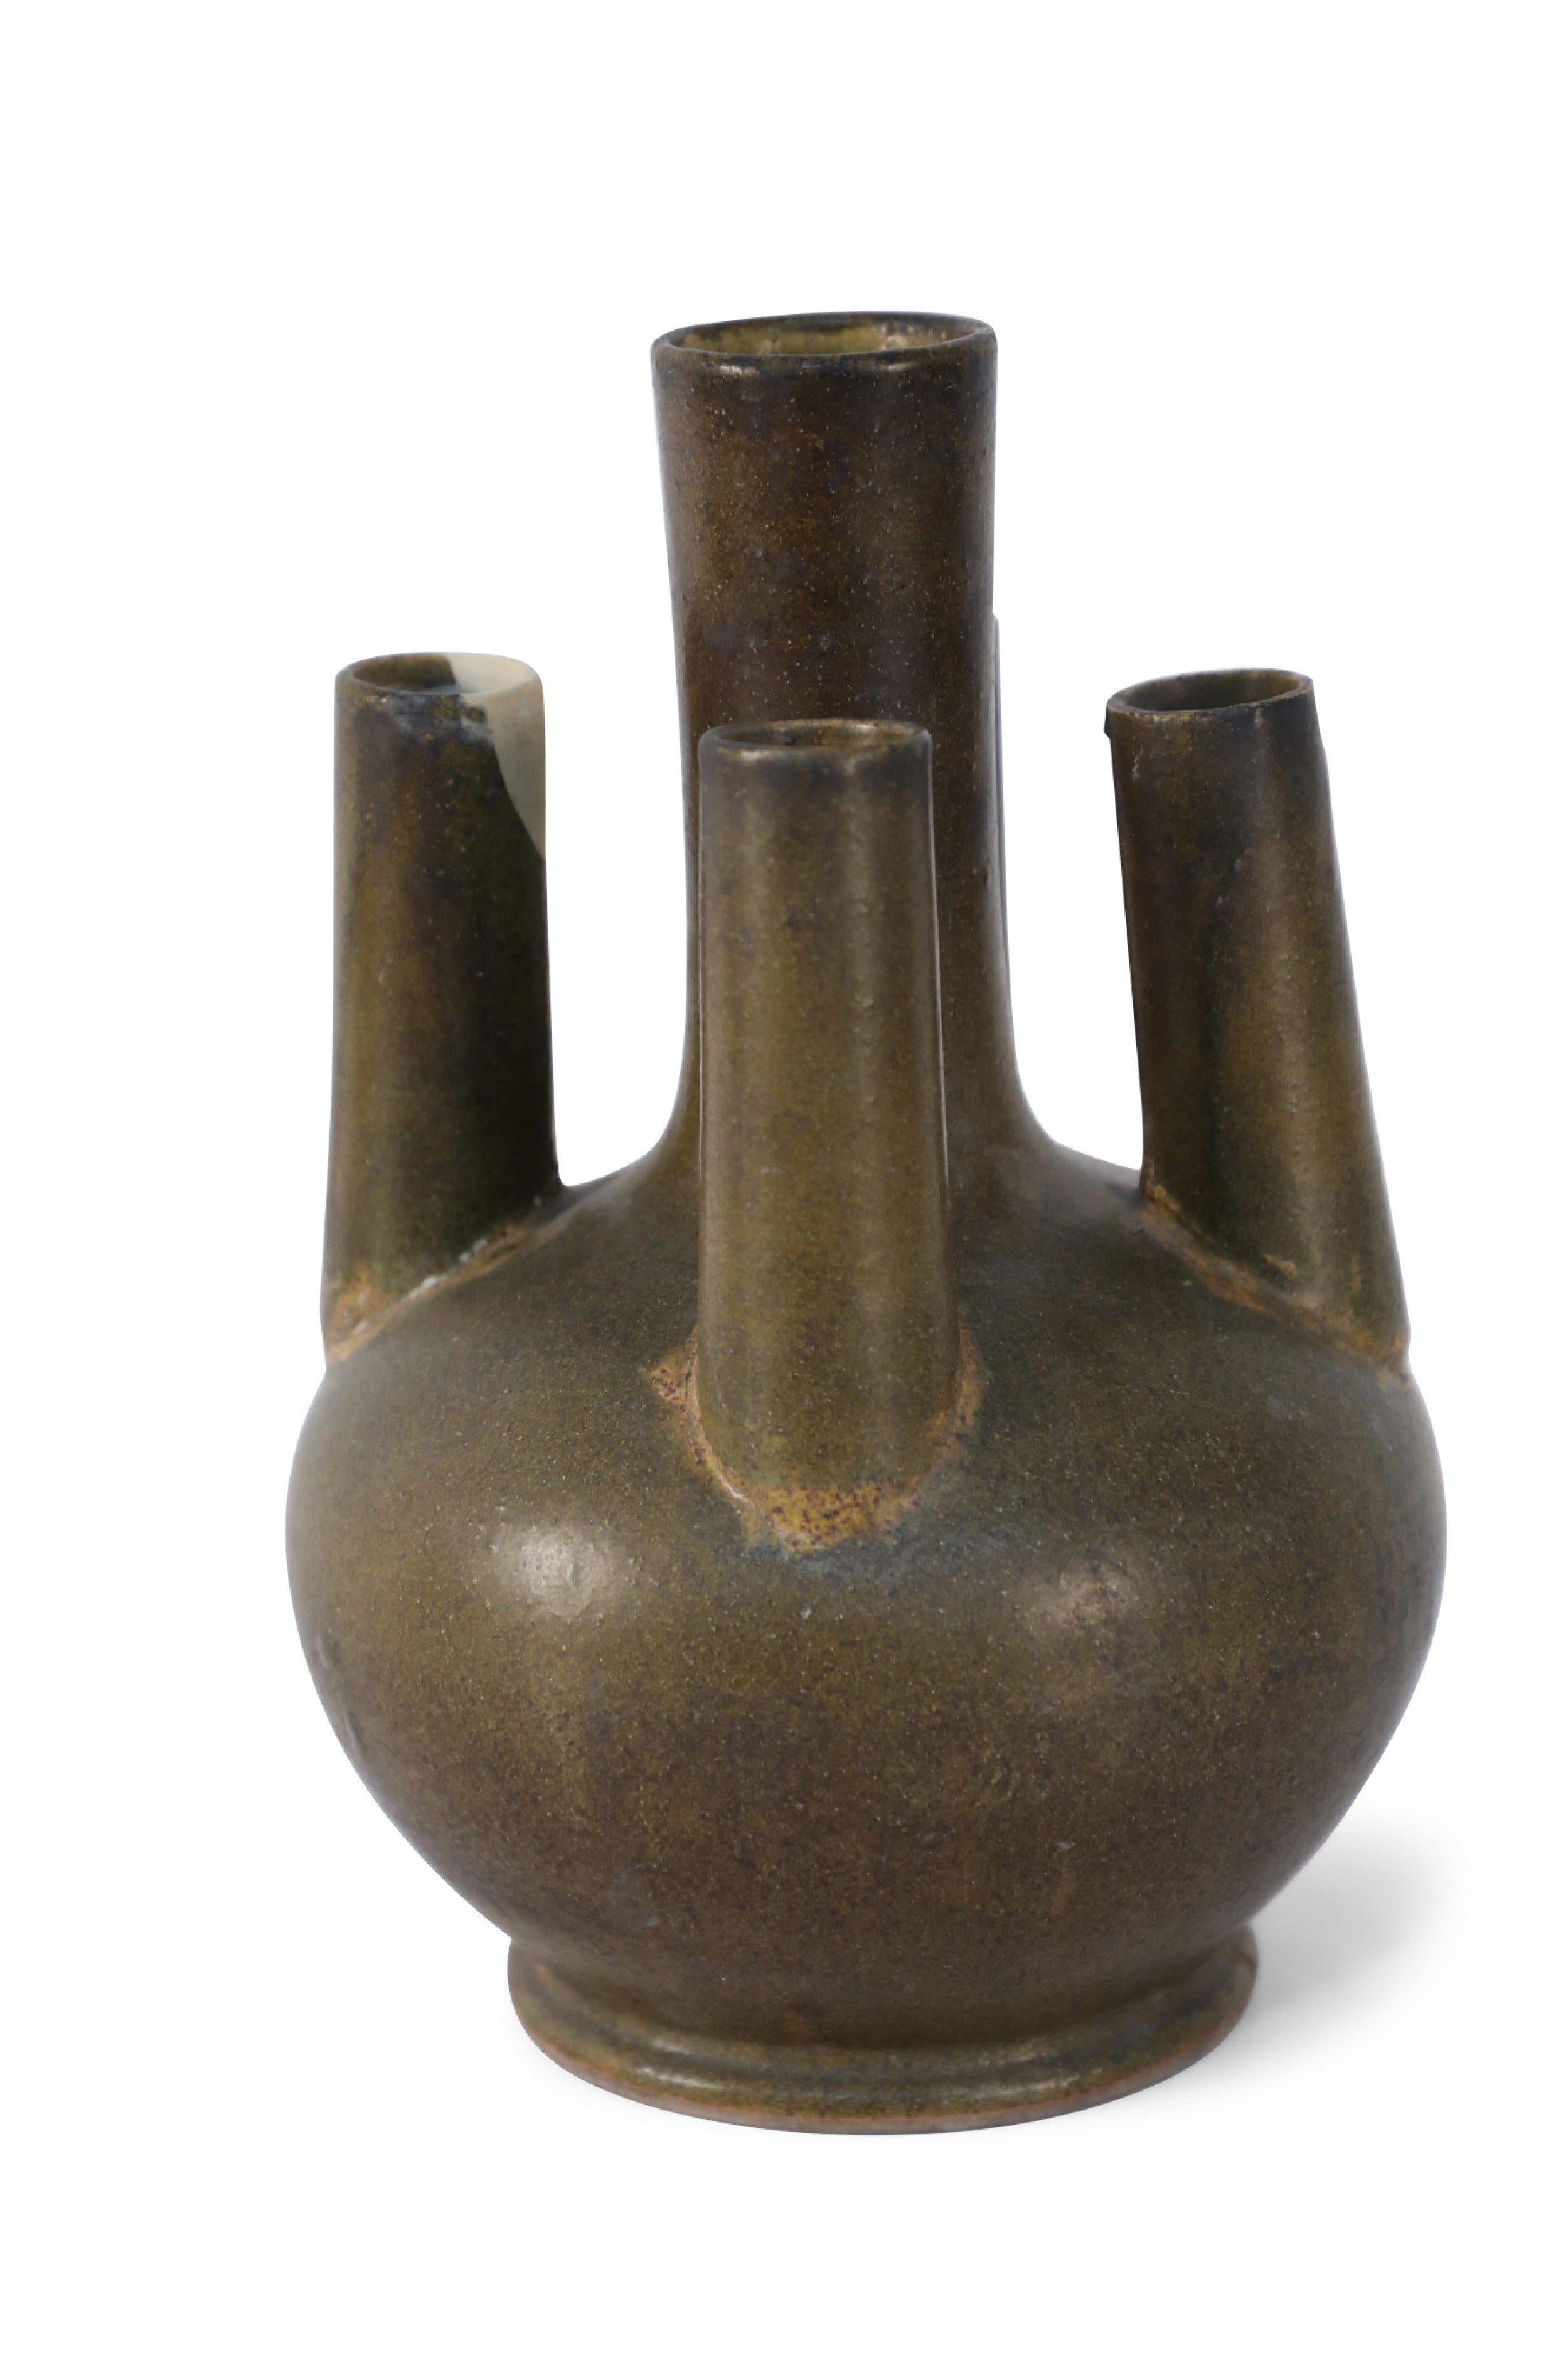 Chinese olive green and brown glaze porcelain vase with one tall tube surrounded by four shorter tubes, all extending from a bulbous shape, on a circular foot.
    